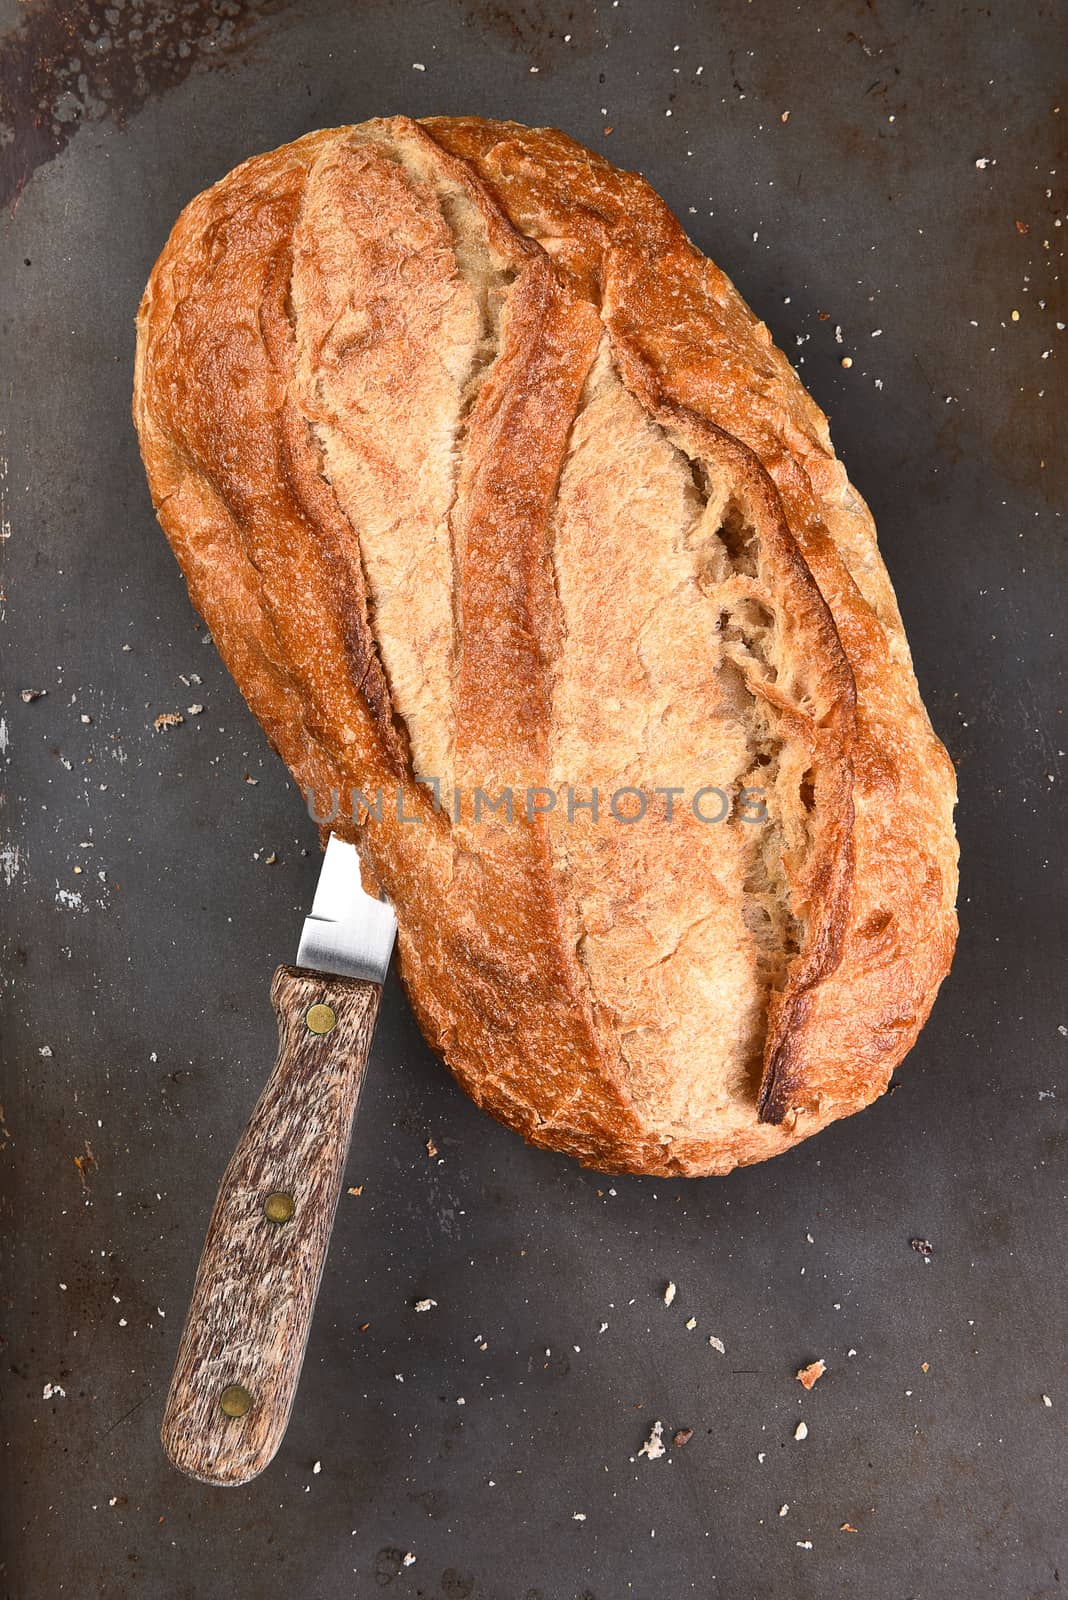 Still life of a loaf of country style white bread on a baking sheet. There is a knife stuck in the side of the loaf.